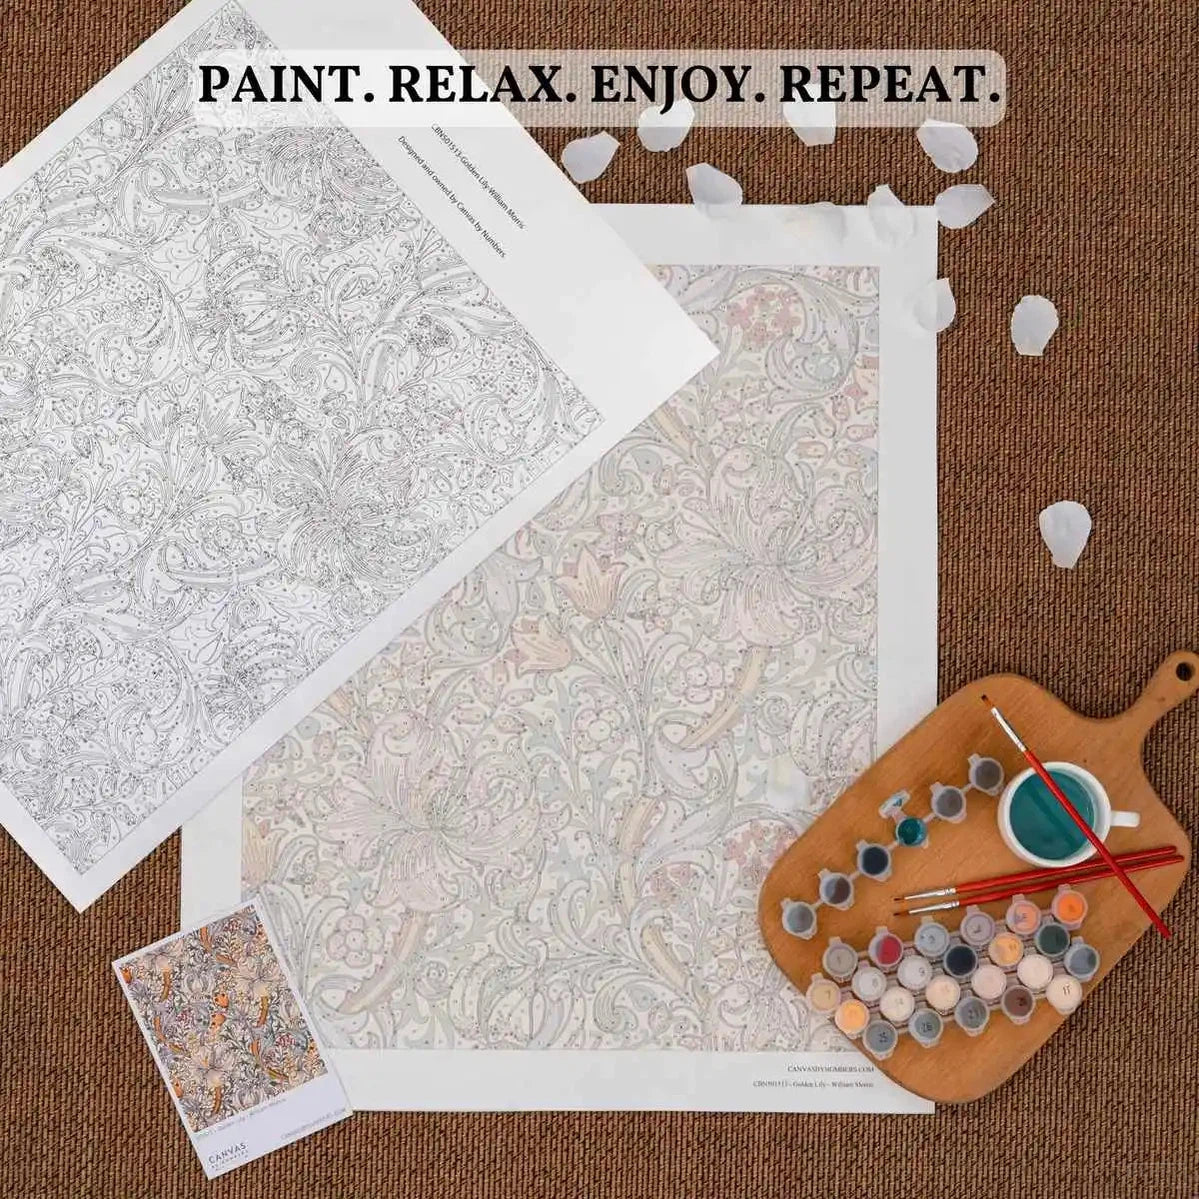 Antibes Morning - Paint by Numbers-The Antibes Morning paint by numbers depicts an idyllic landscape with intricate textures and calming colors. Get yours today at CBN!-Canvas by Numbers